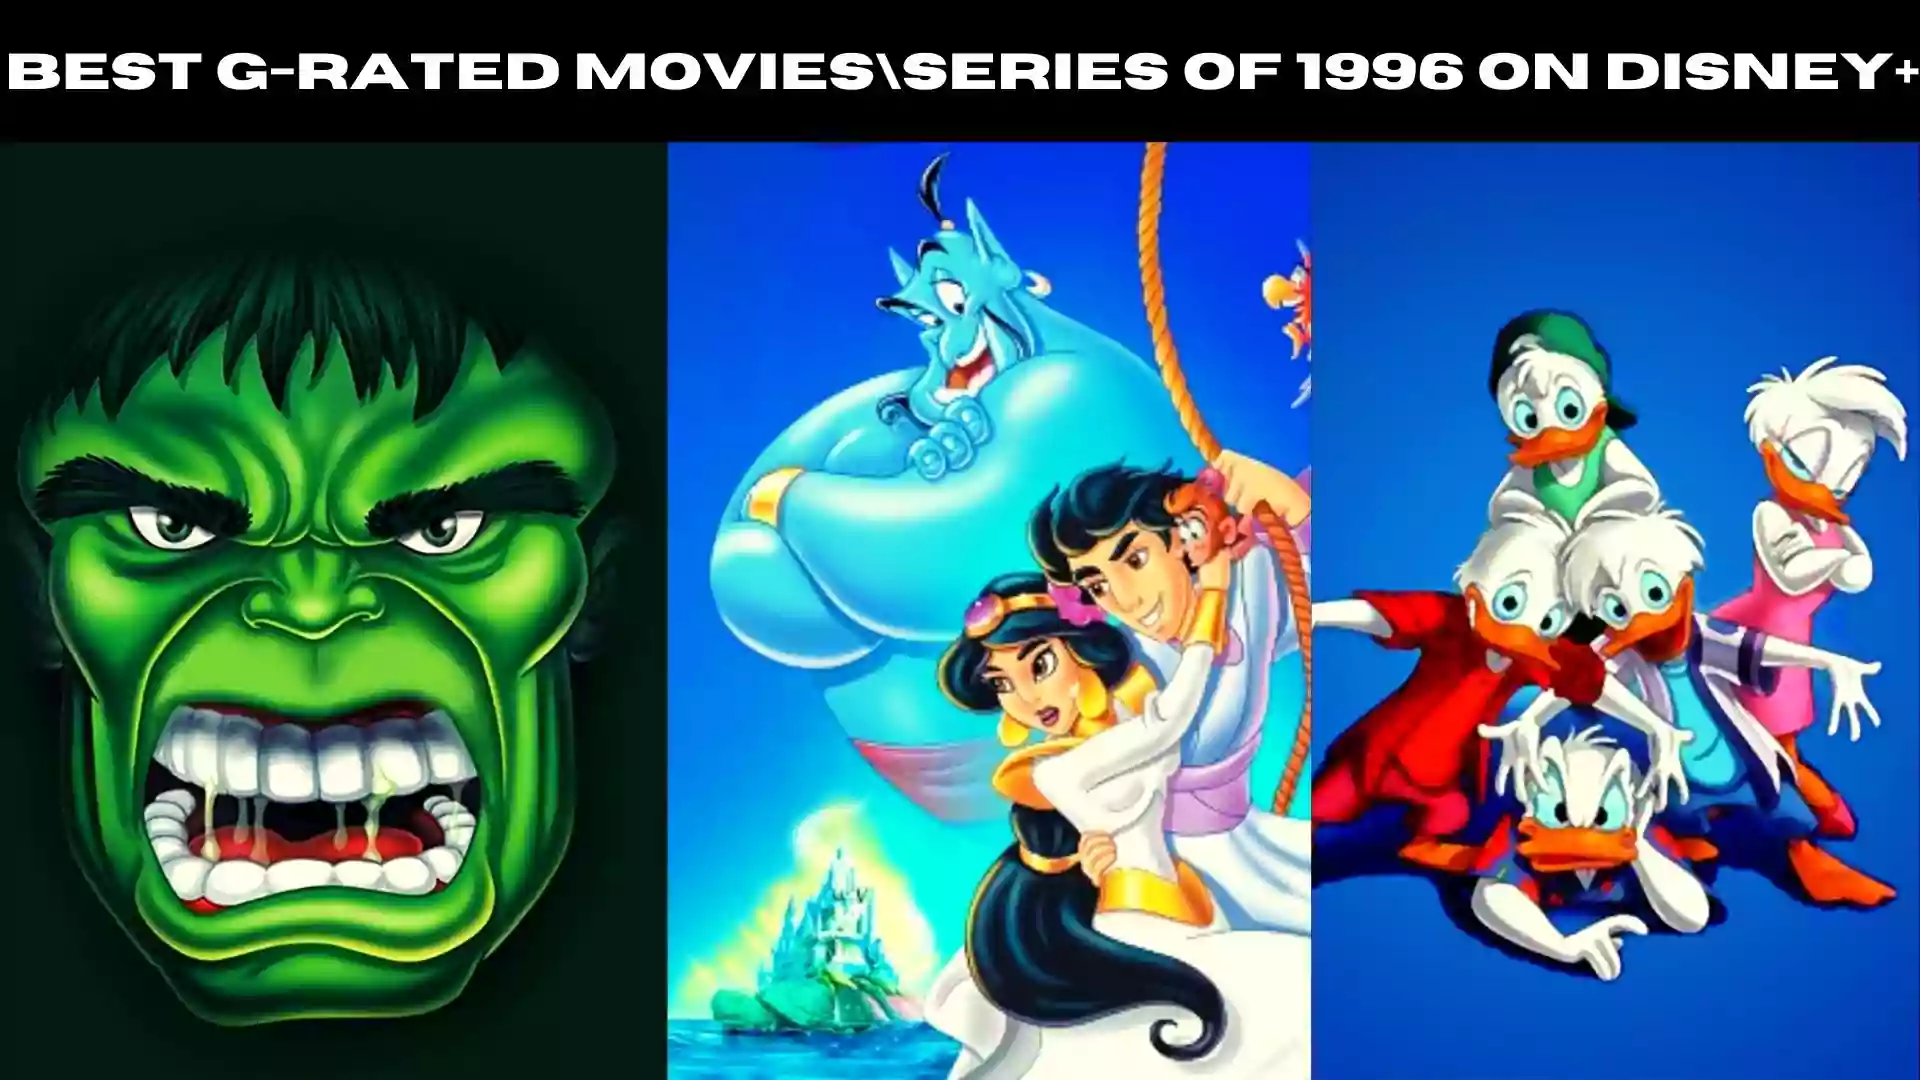 Best G-Rated Movies/series of 1996 on Disney+